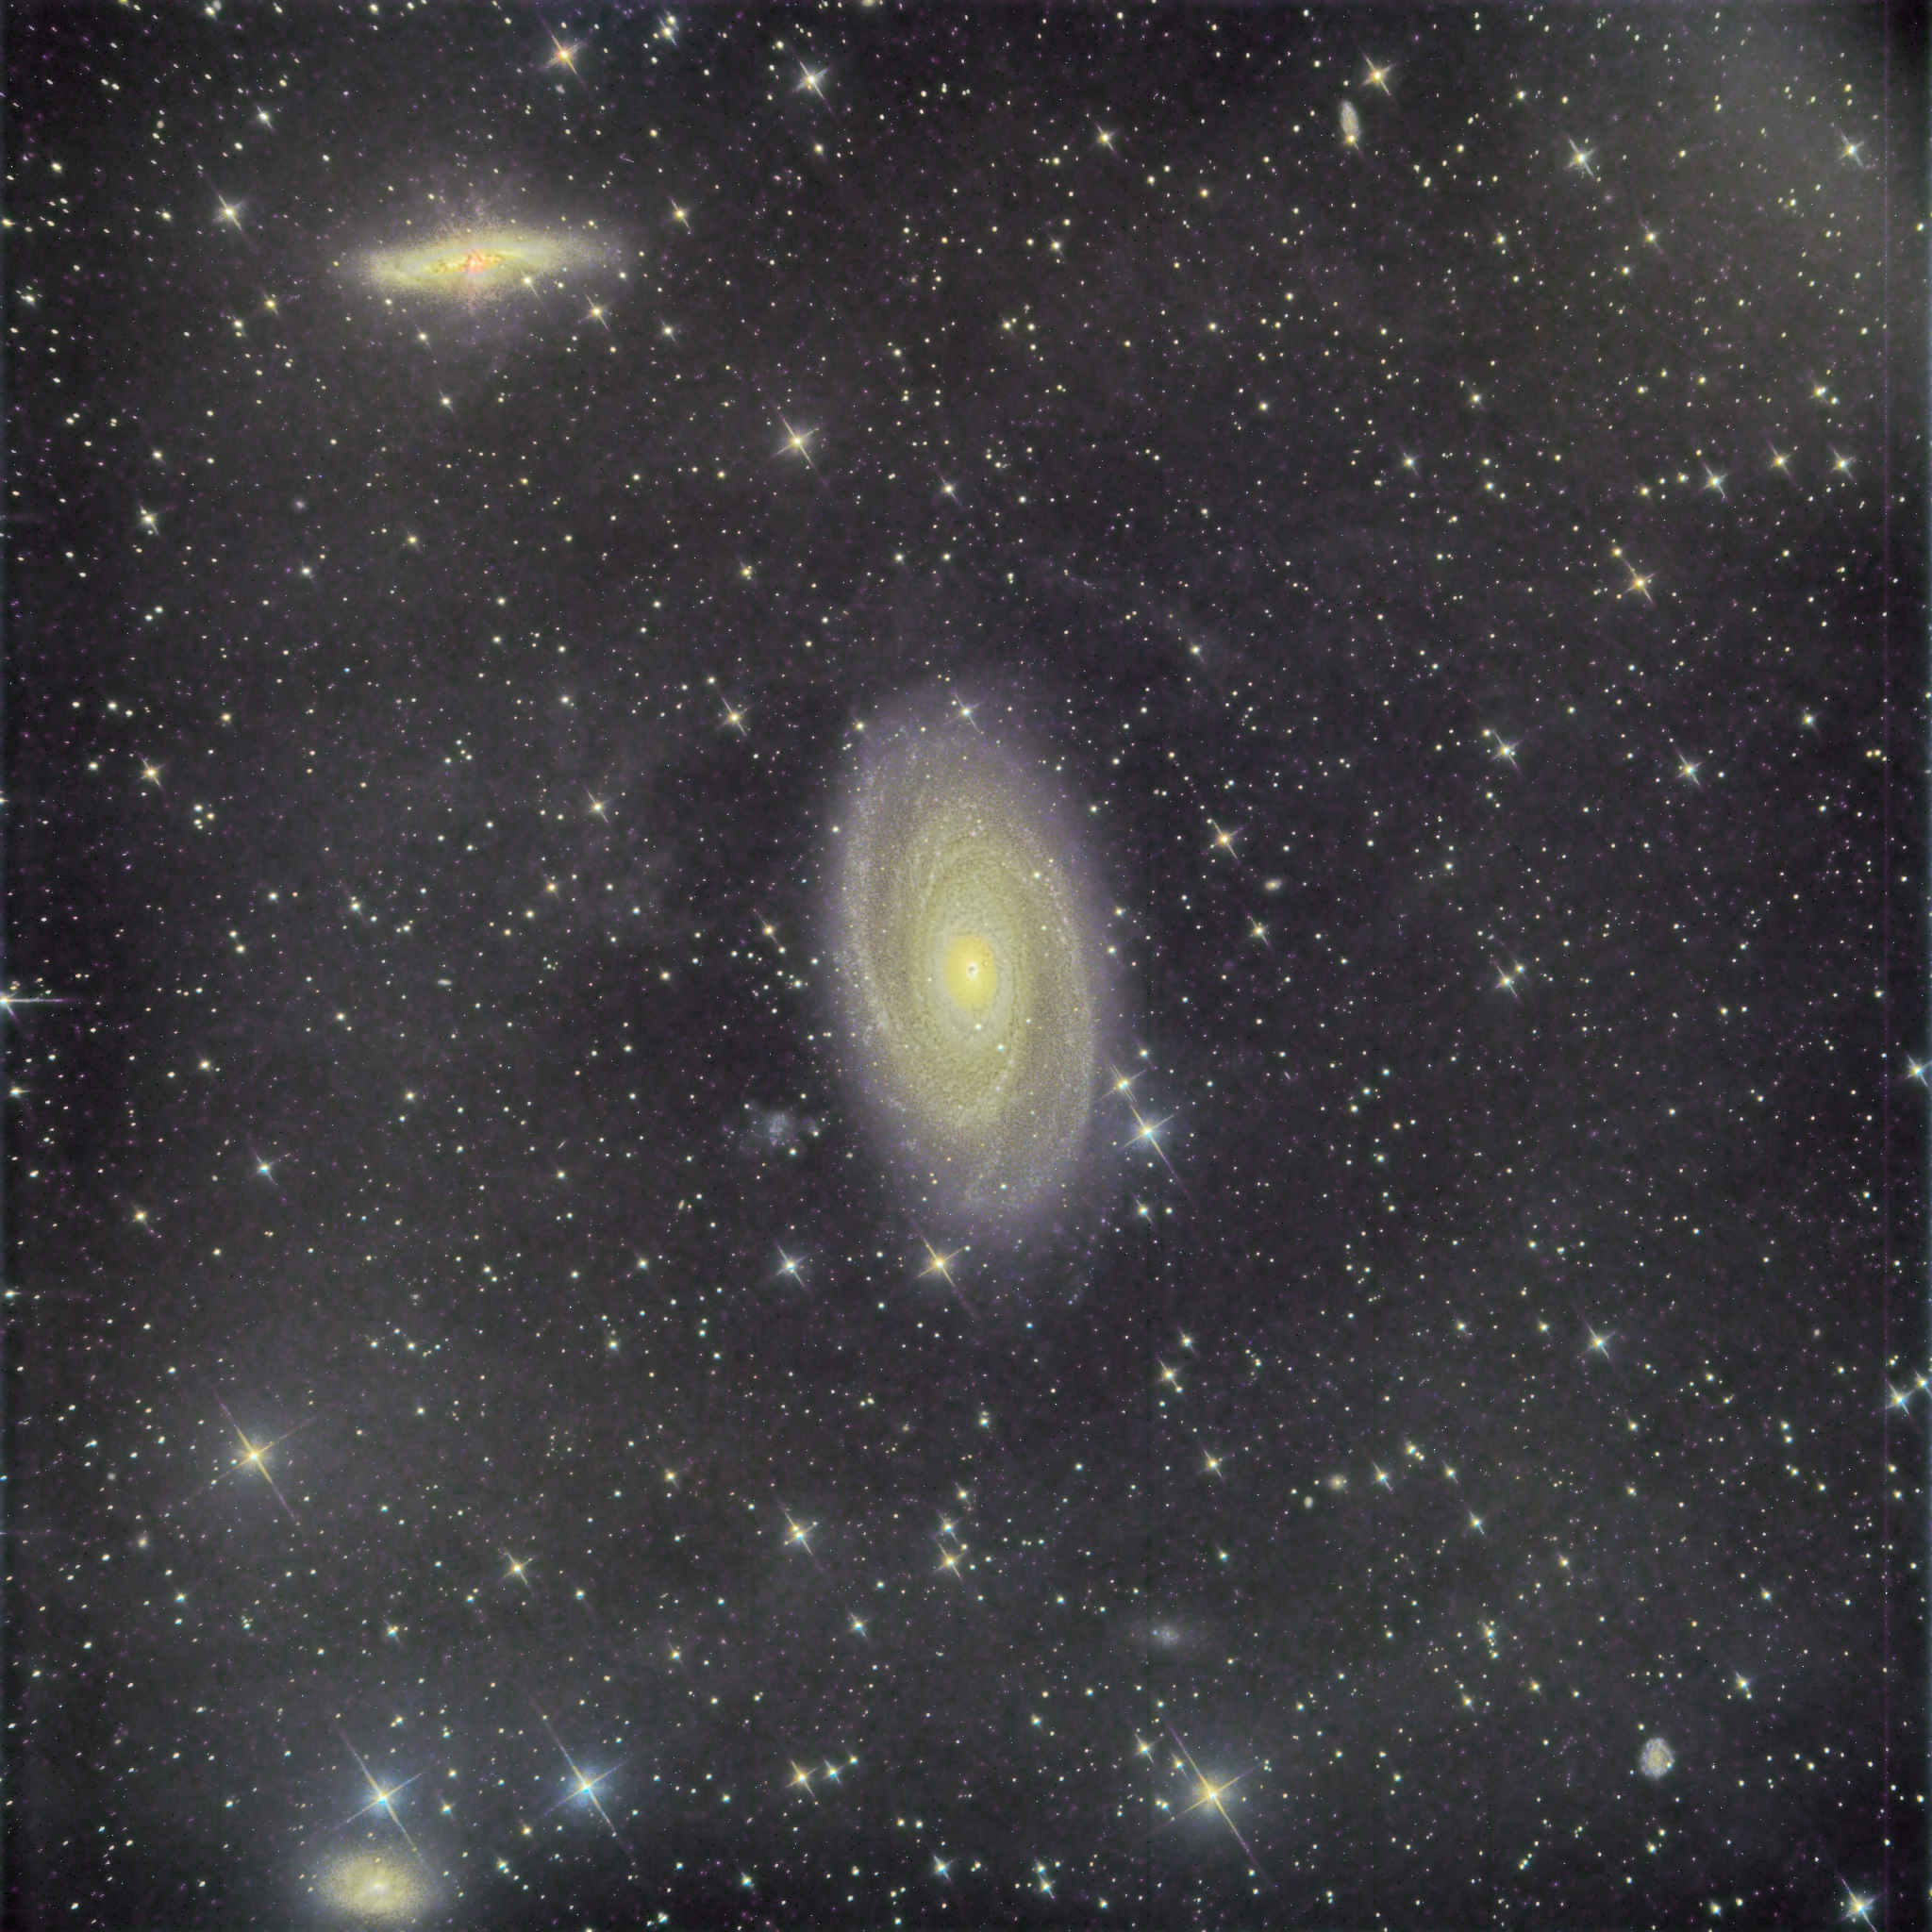 Bode's Galaxy (M81) and Cigar Galaxy (M82). Taken with a remote telescope.